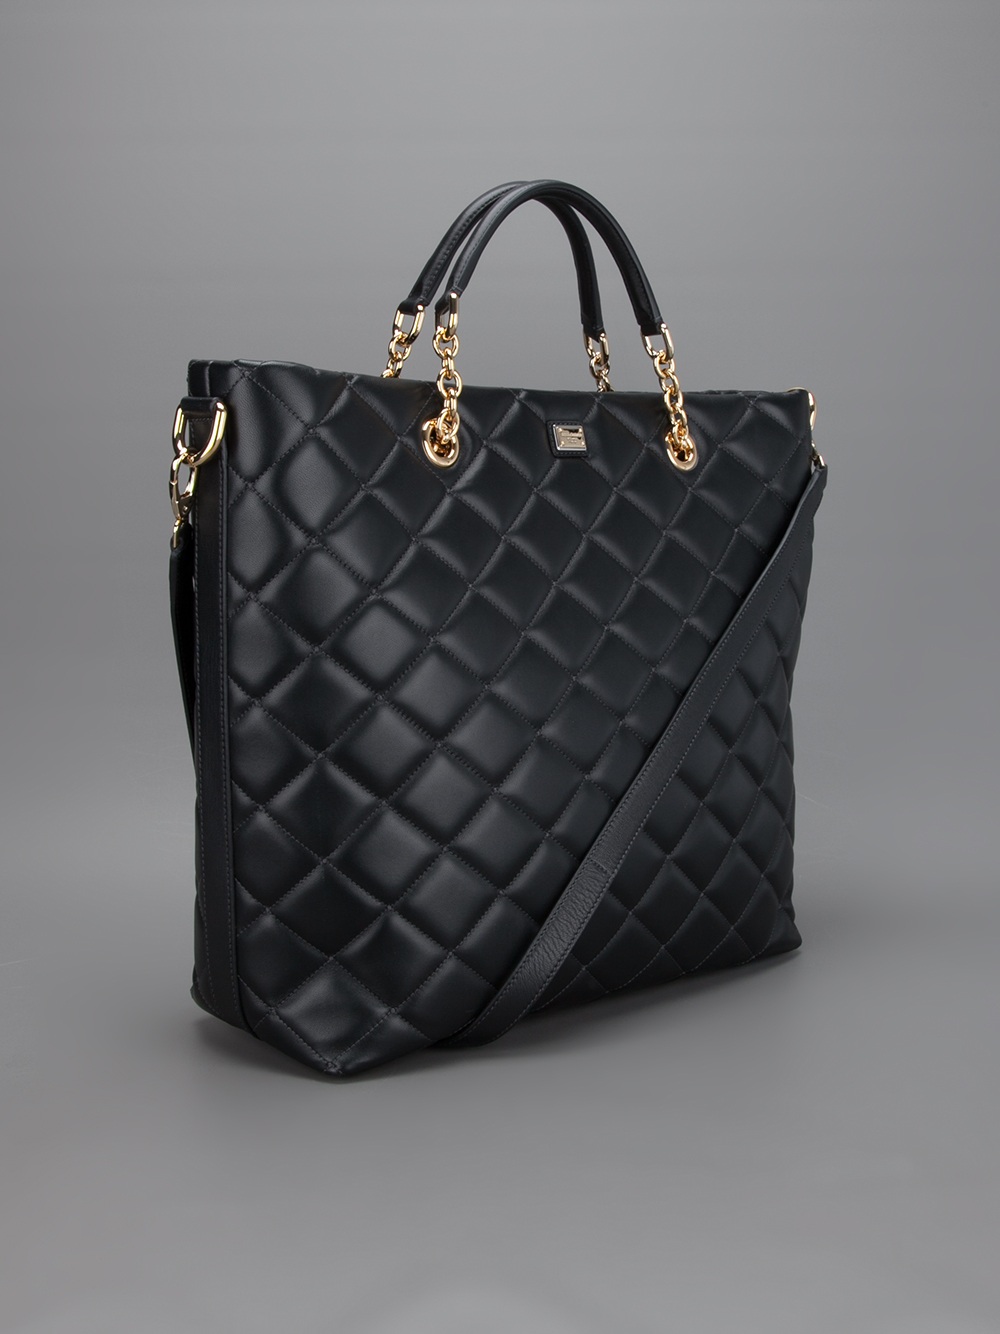 Dolce & Gabbana Quilted Tote Bag in Black - Lyst